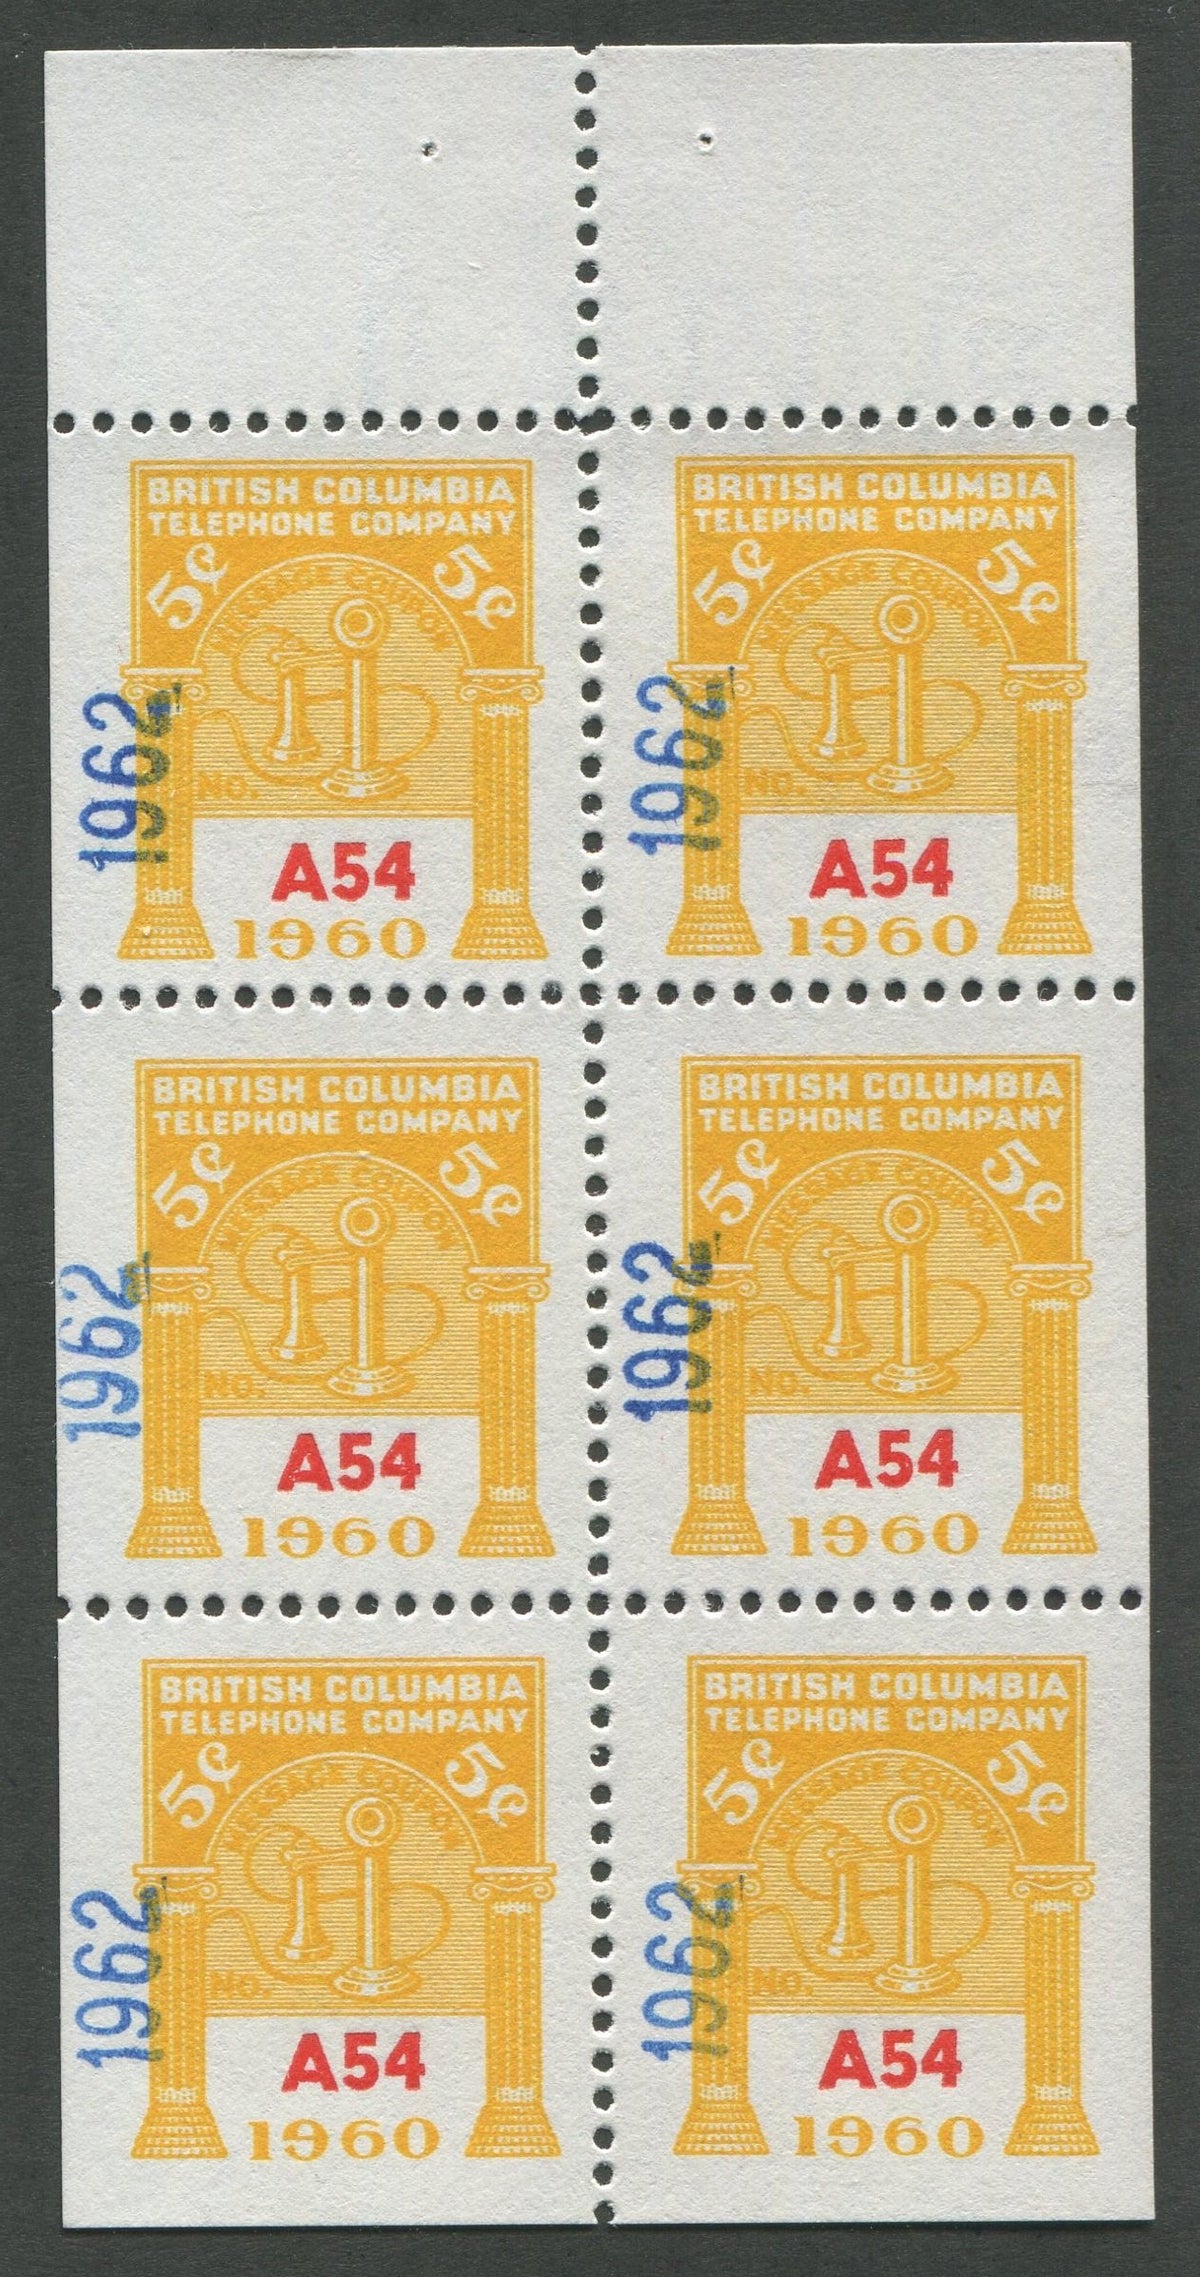 0294BC1708 - BCT196 - Mint Booklet Pane, Watermarked